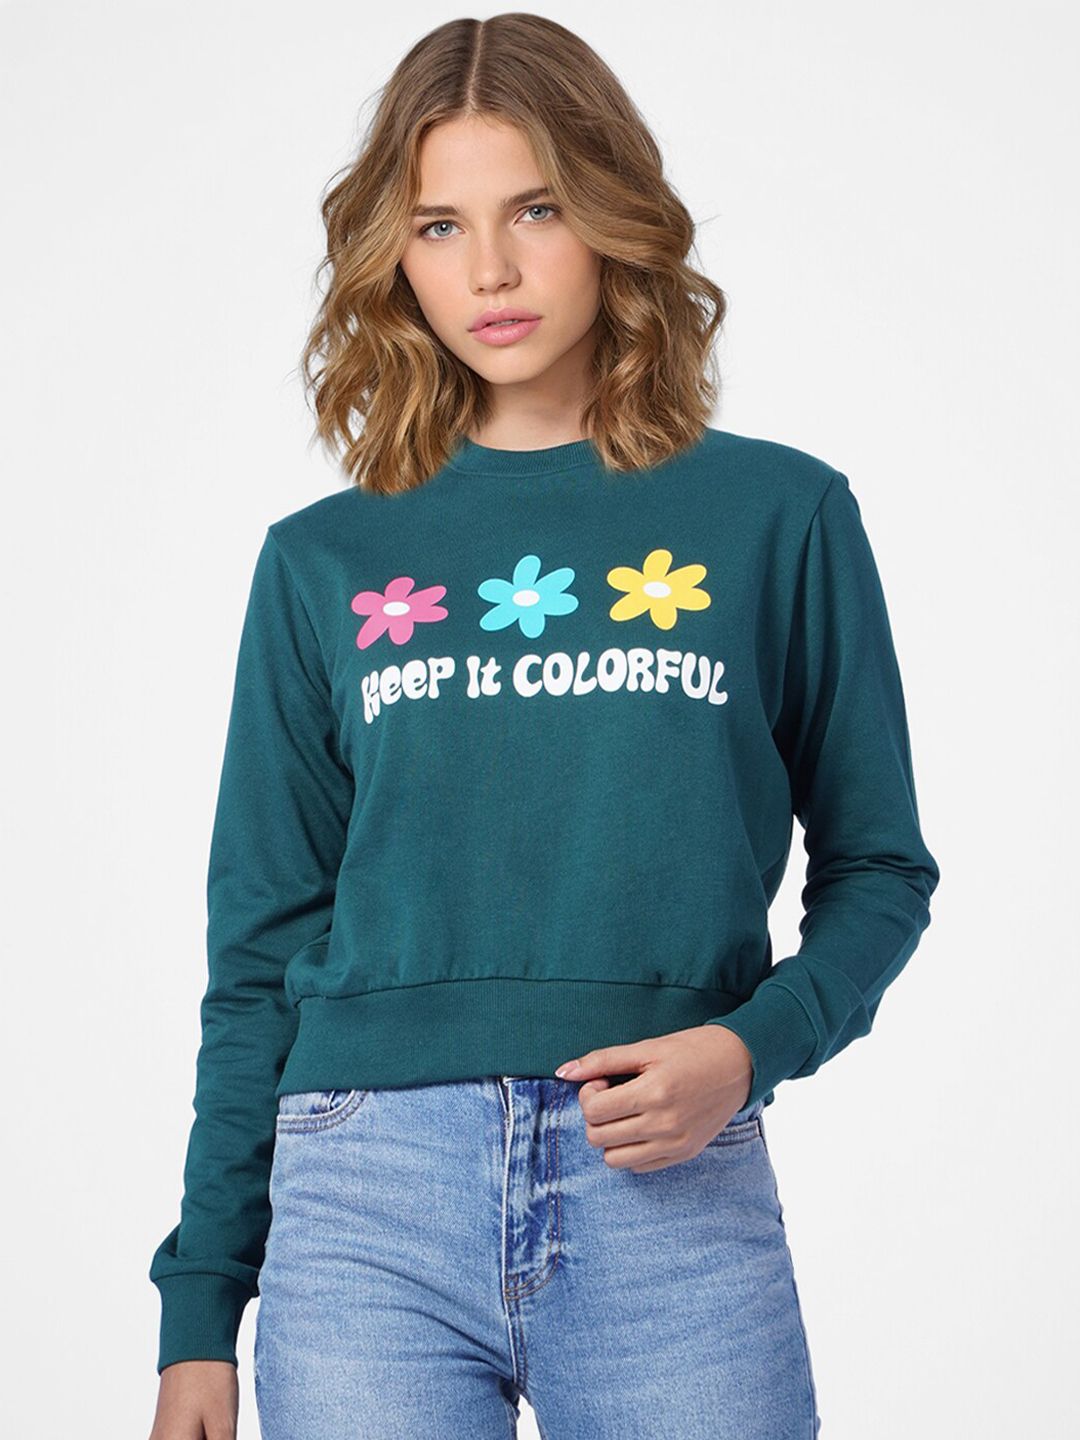 ONLY Women Teal Typography Printed Sweatshirt Price in India